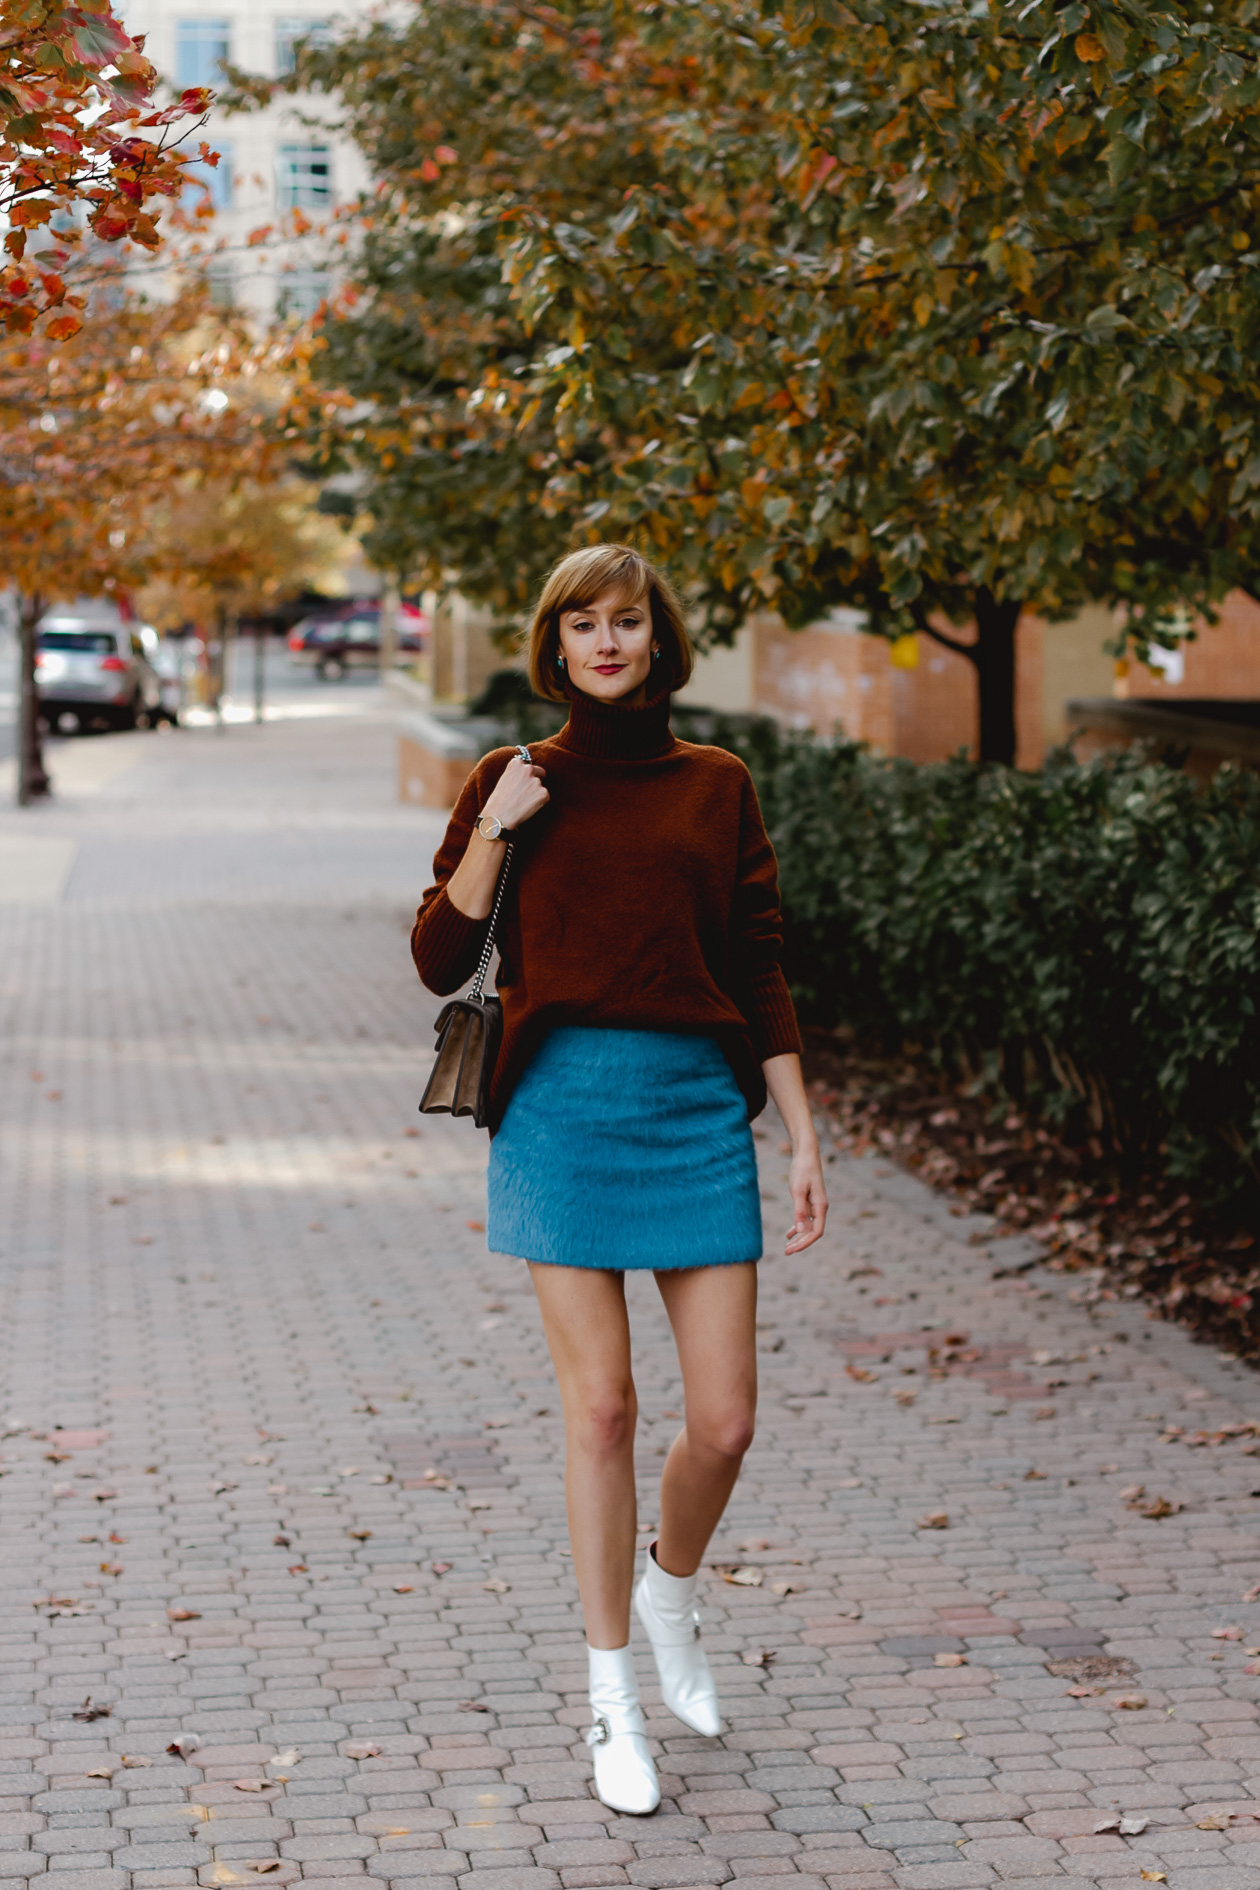 & Other Stories sweater and mini skirt